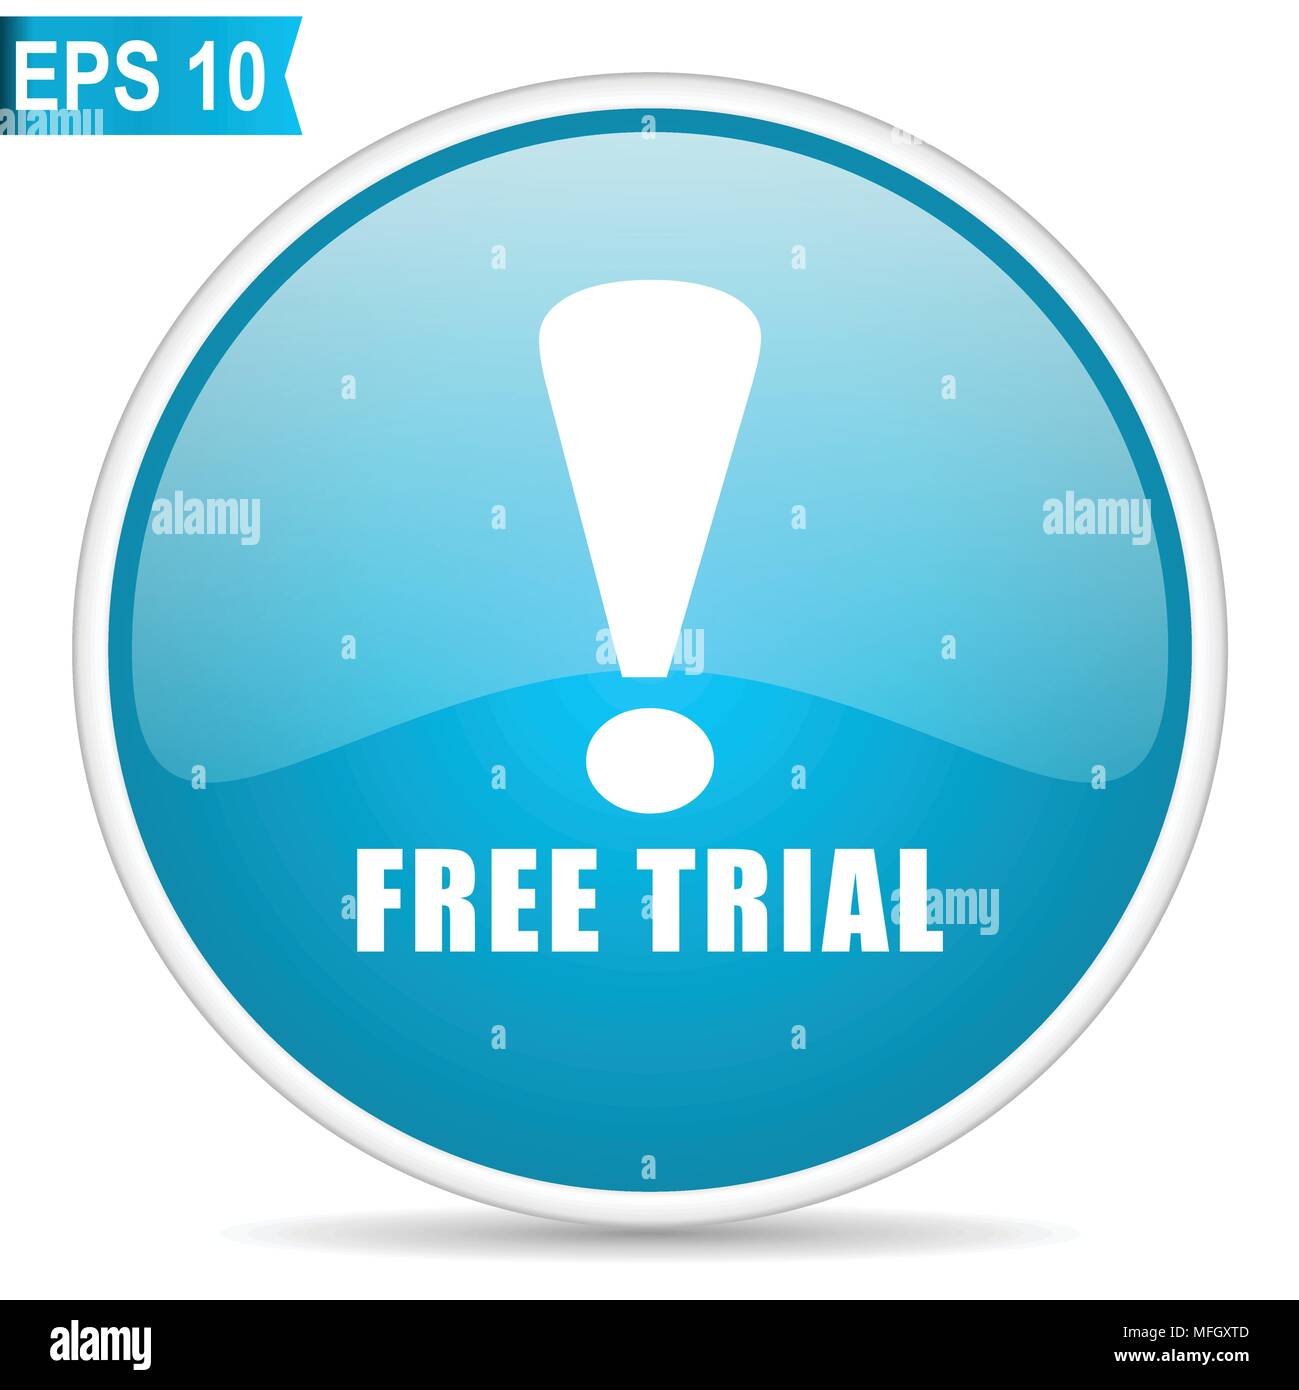 Free trial blue glossy round vector icon in eps 10. Editable modern design internet button on white background. Stock Vector